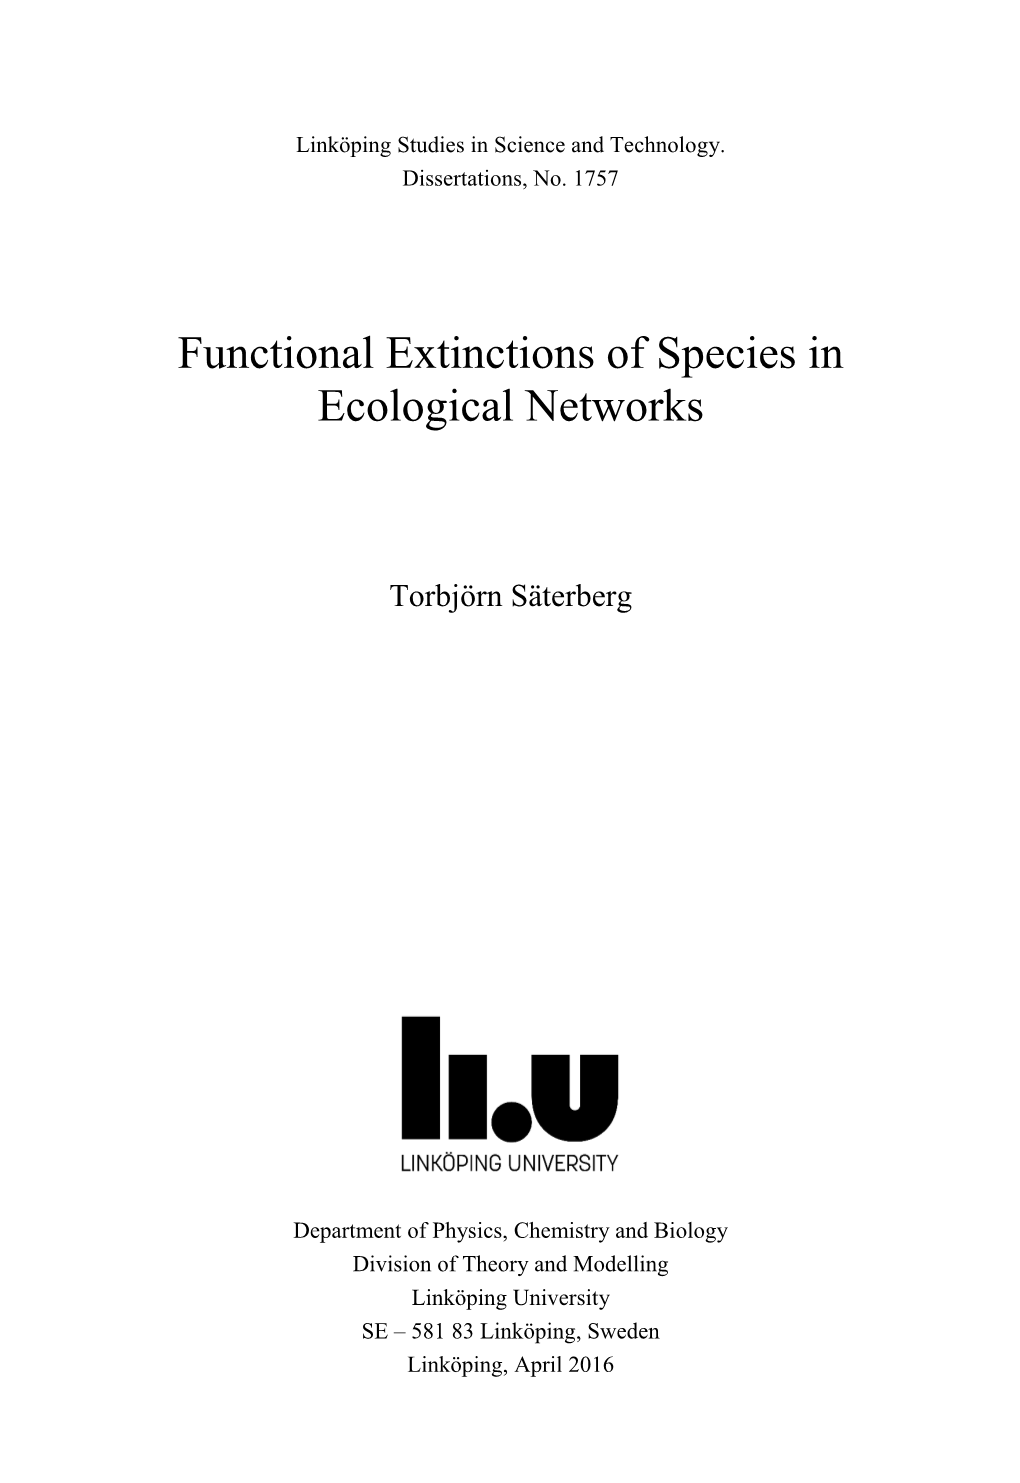 Functional Extinctions of Species in Ecological Networks